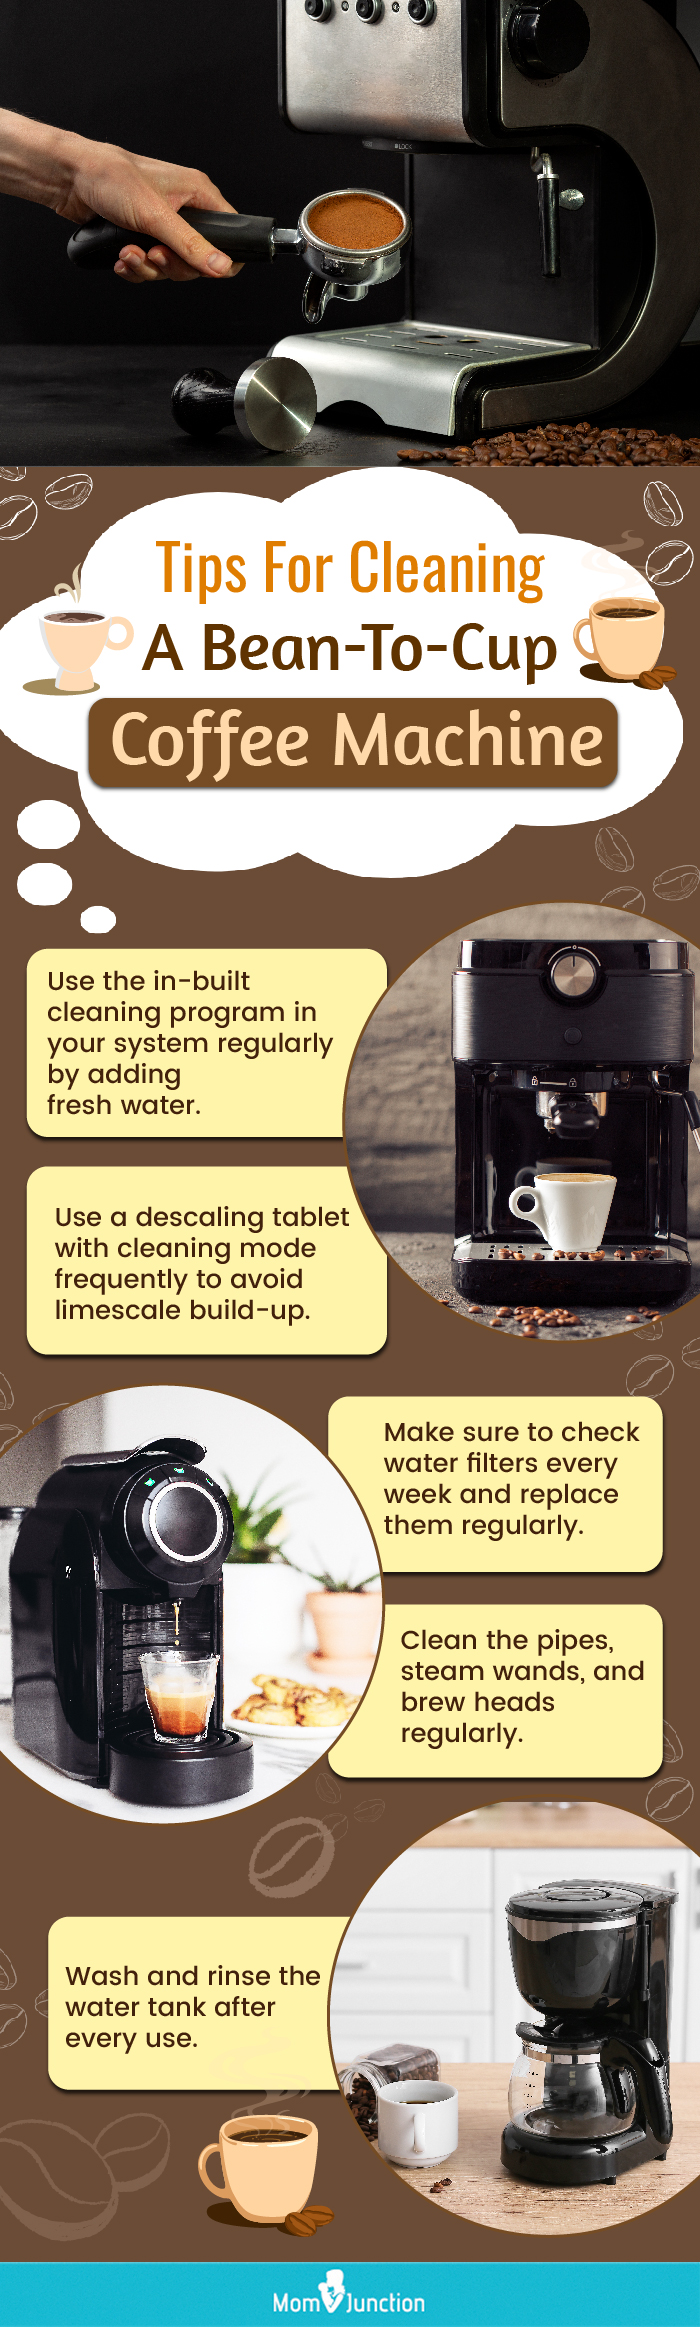 6 Simple Tips for Making Better Coffee on Your Coffee Machine at Home –  Yahava KoffeeWorks